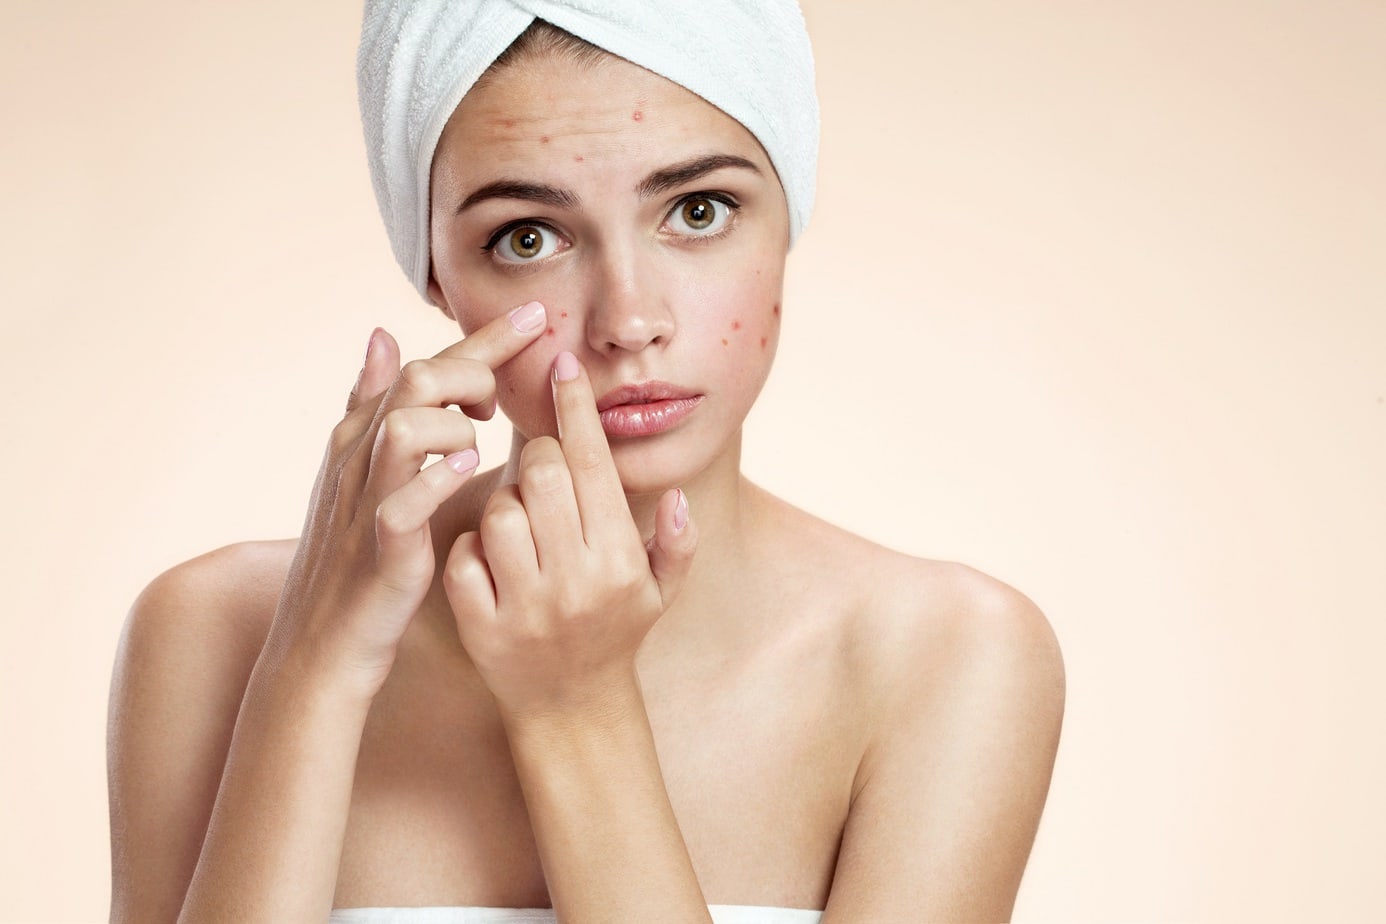 Everything you need to know about acne in adulthood